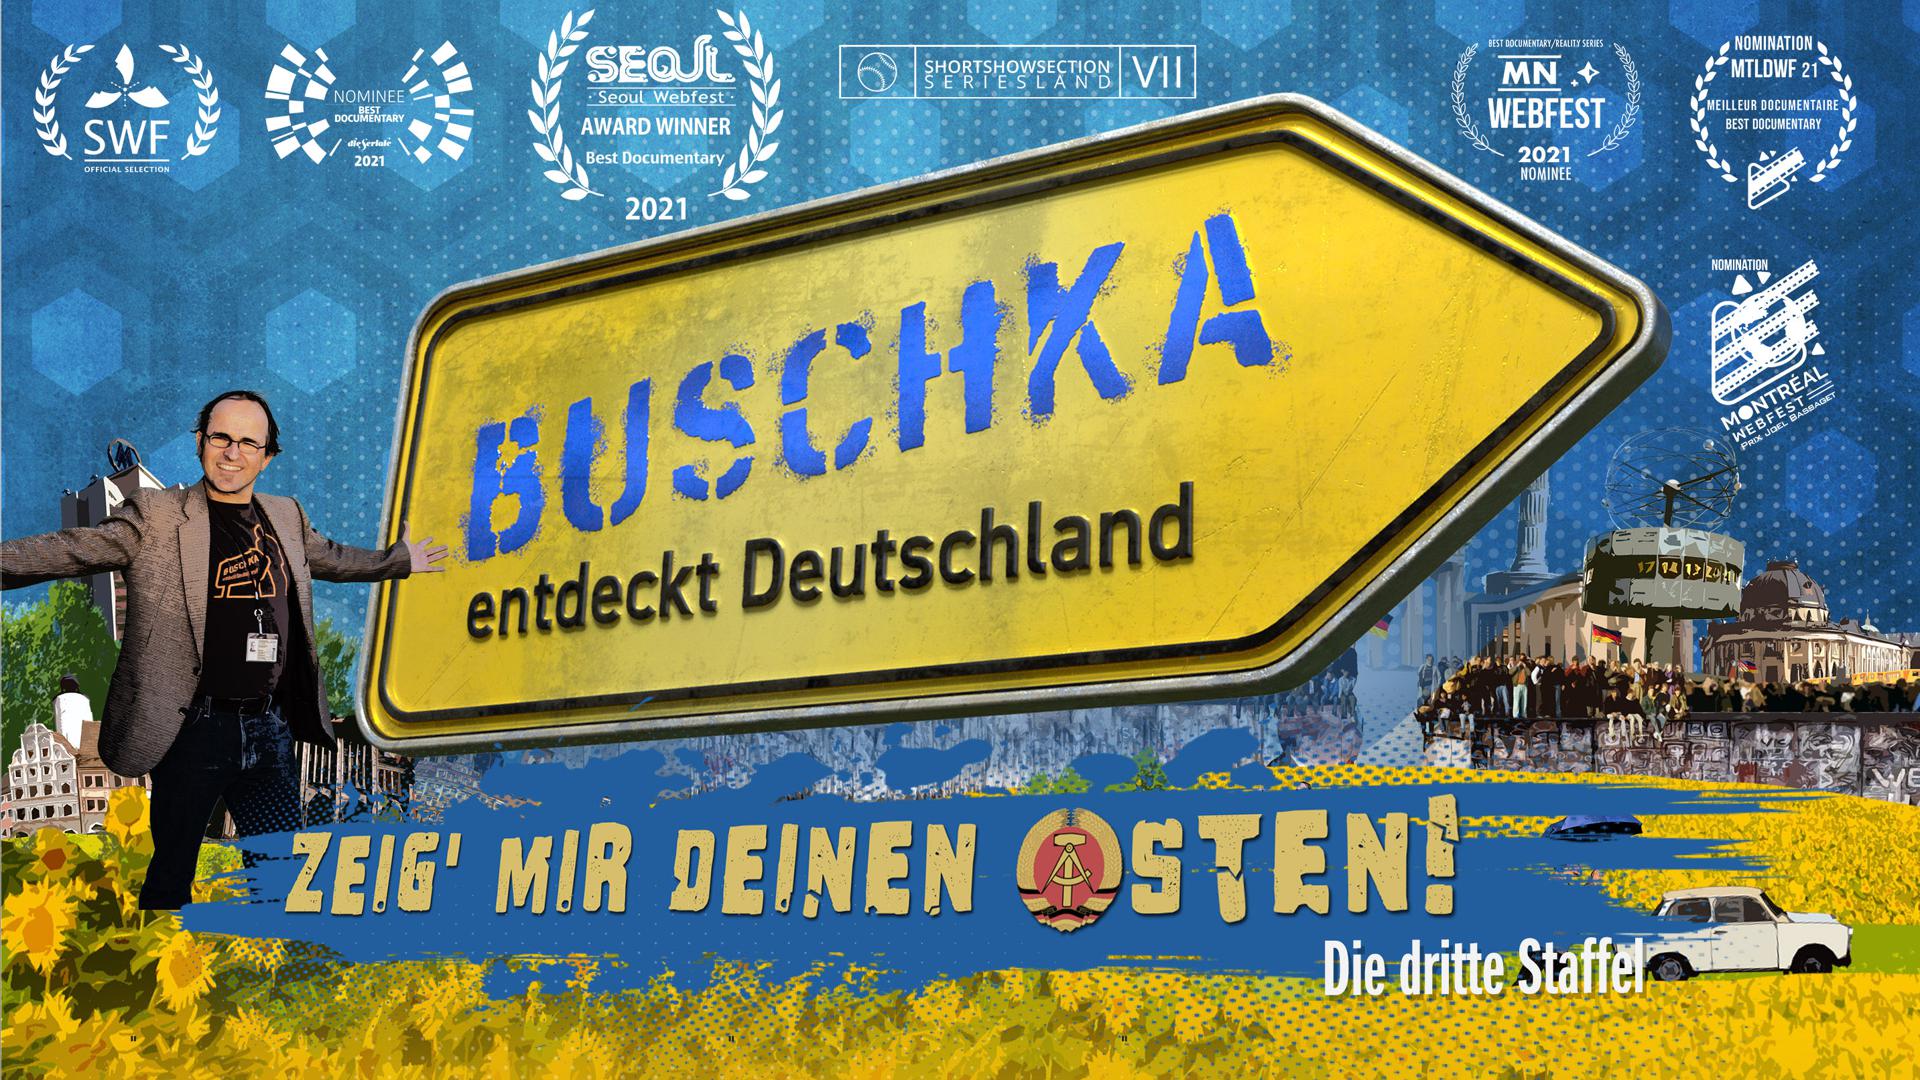 Buschka discovers Germany - Show Me Your East Side! (S03/E04 feat. former GDR civil rights activist Heiko Lietz, Schwerin)